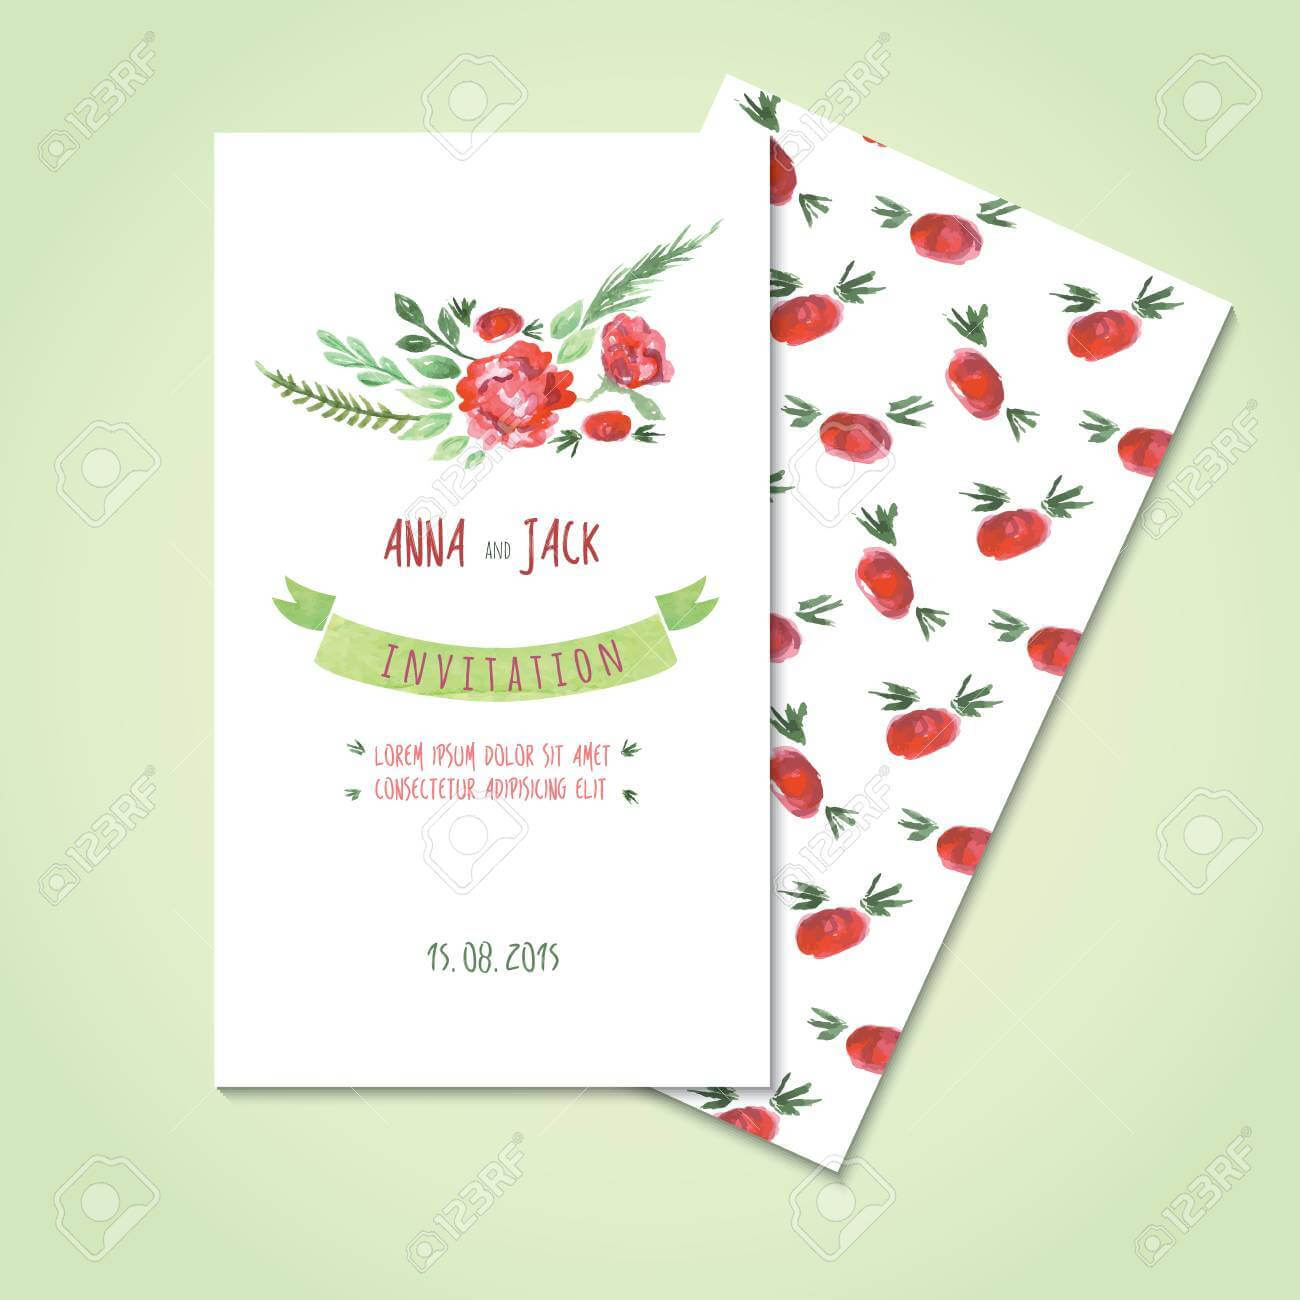 Watercolor Card Templates For Wedding Invitation Save The Date.. With Regard To Save The Date Cards Templates